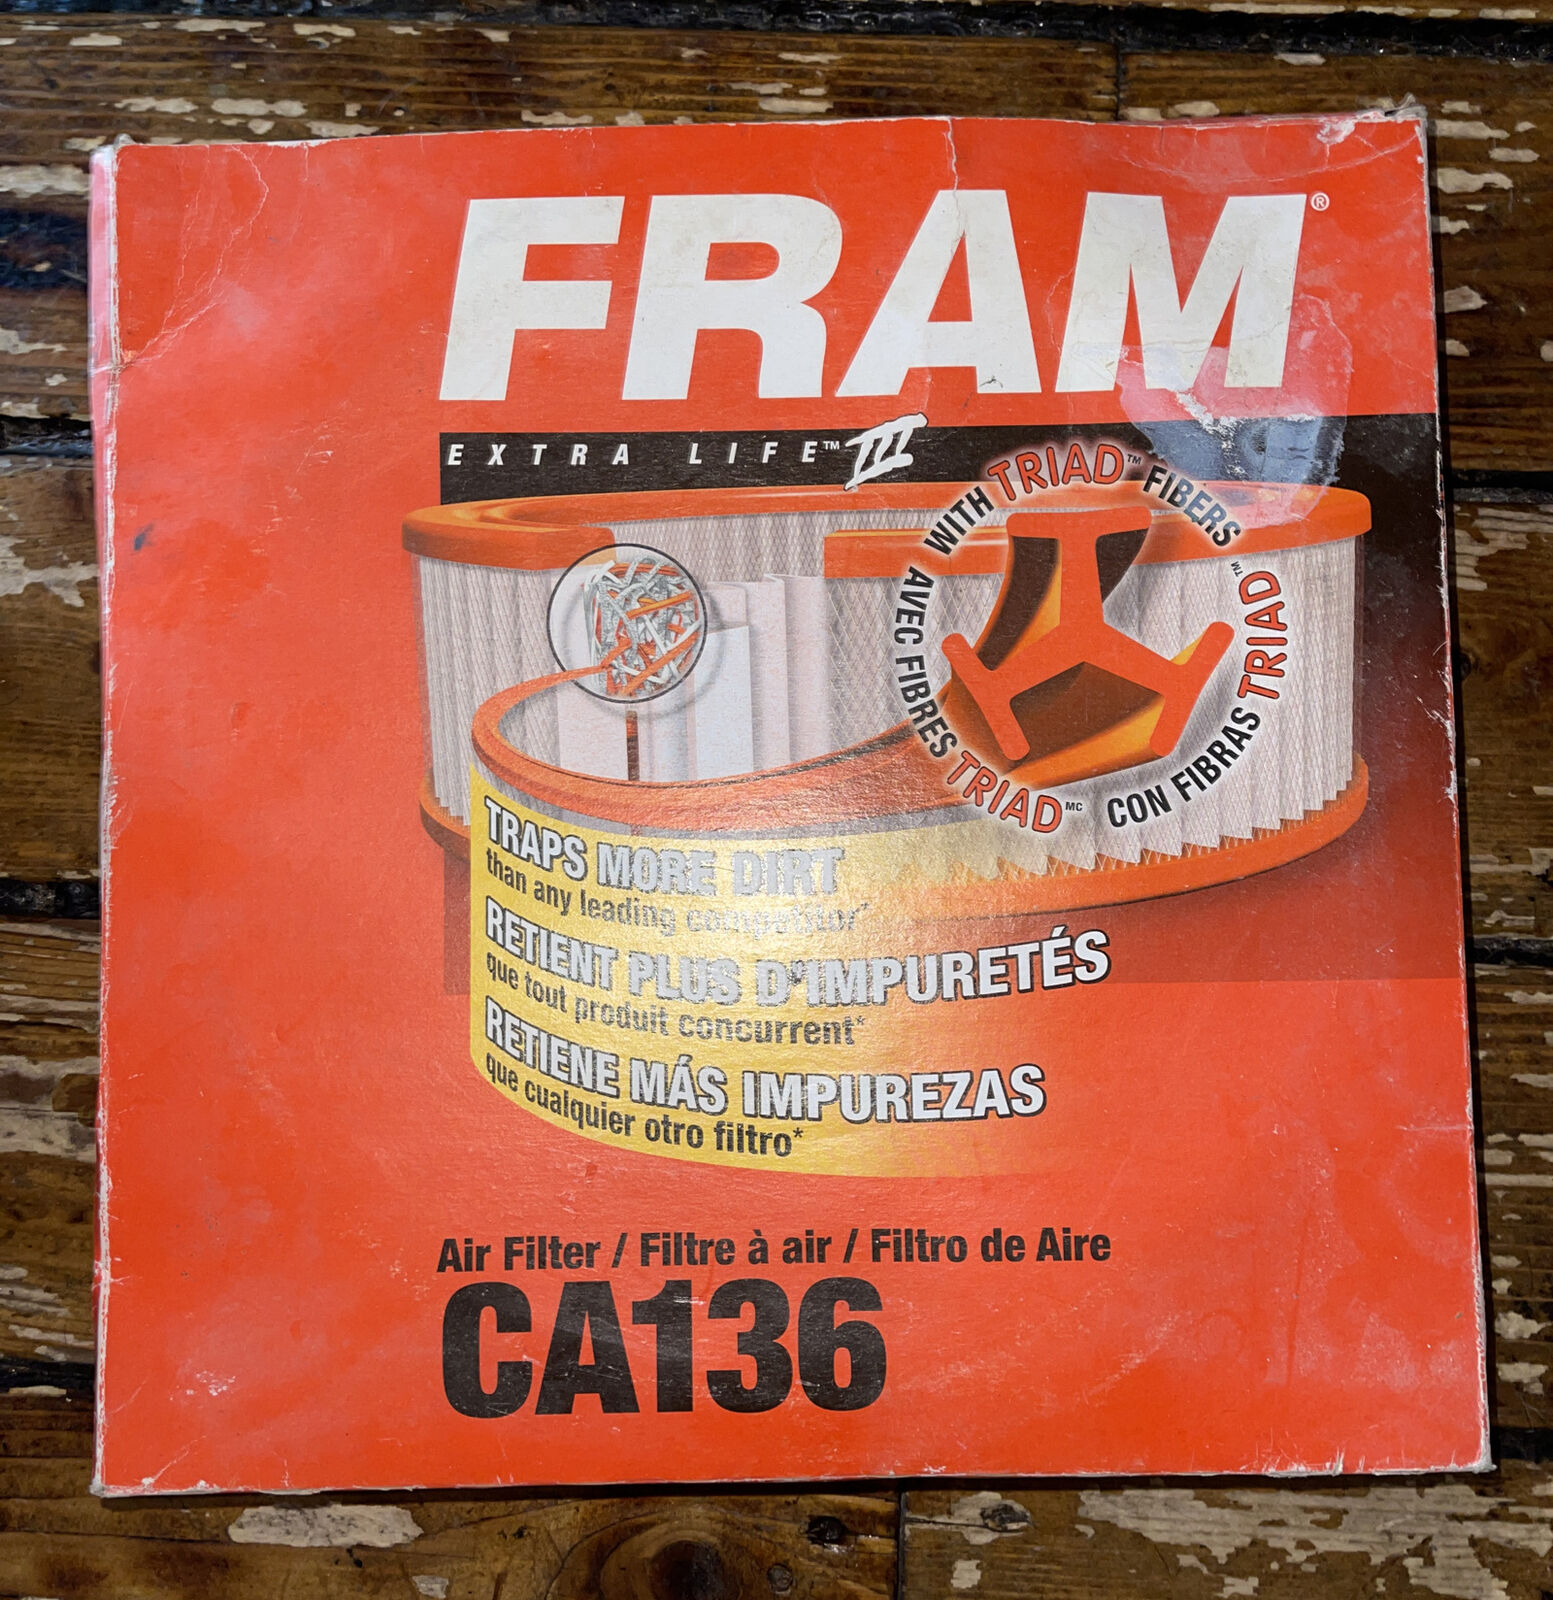 FRAM CA136 Air and Fuel Delivery FRAM, CA136, Air Filter Fits Buick Centurion 19